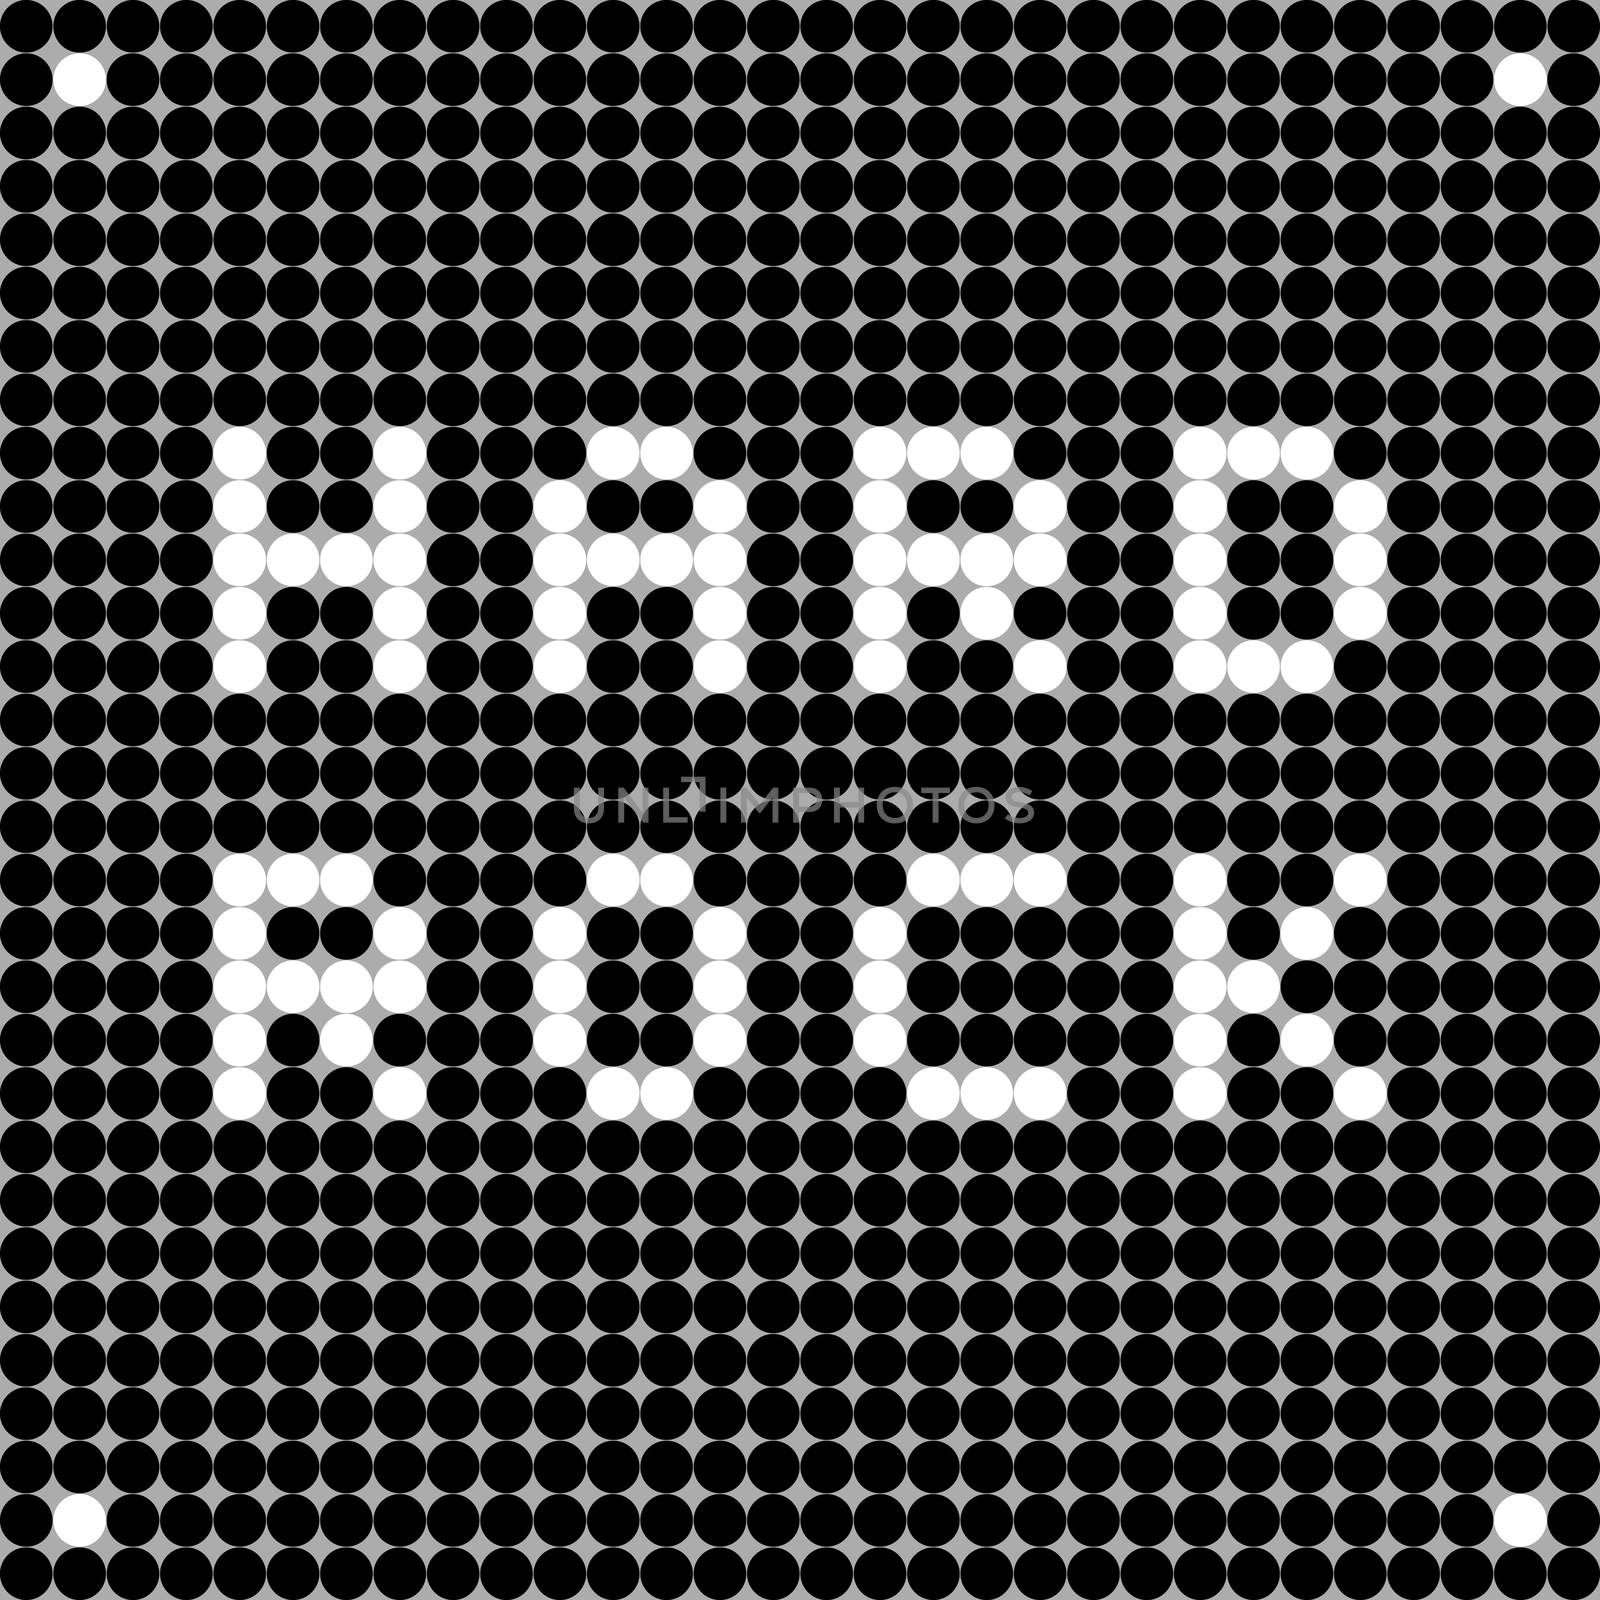 Hard rock music banner, pixel illustration of a scoreboard composition with digital text made of dots